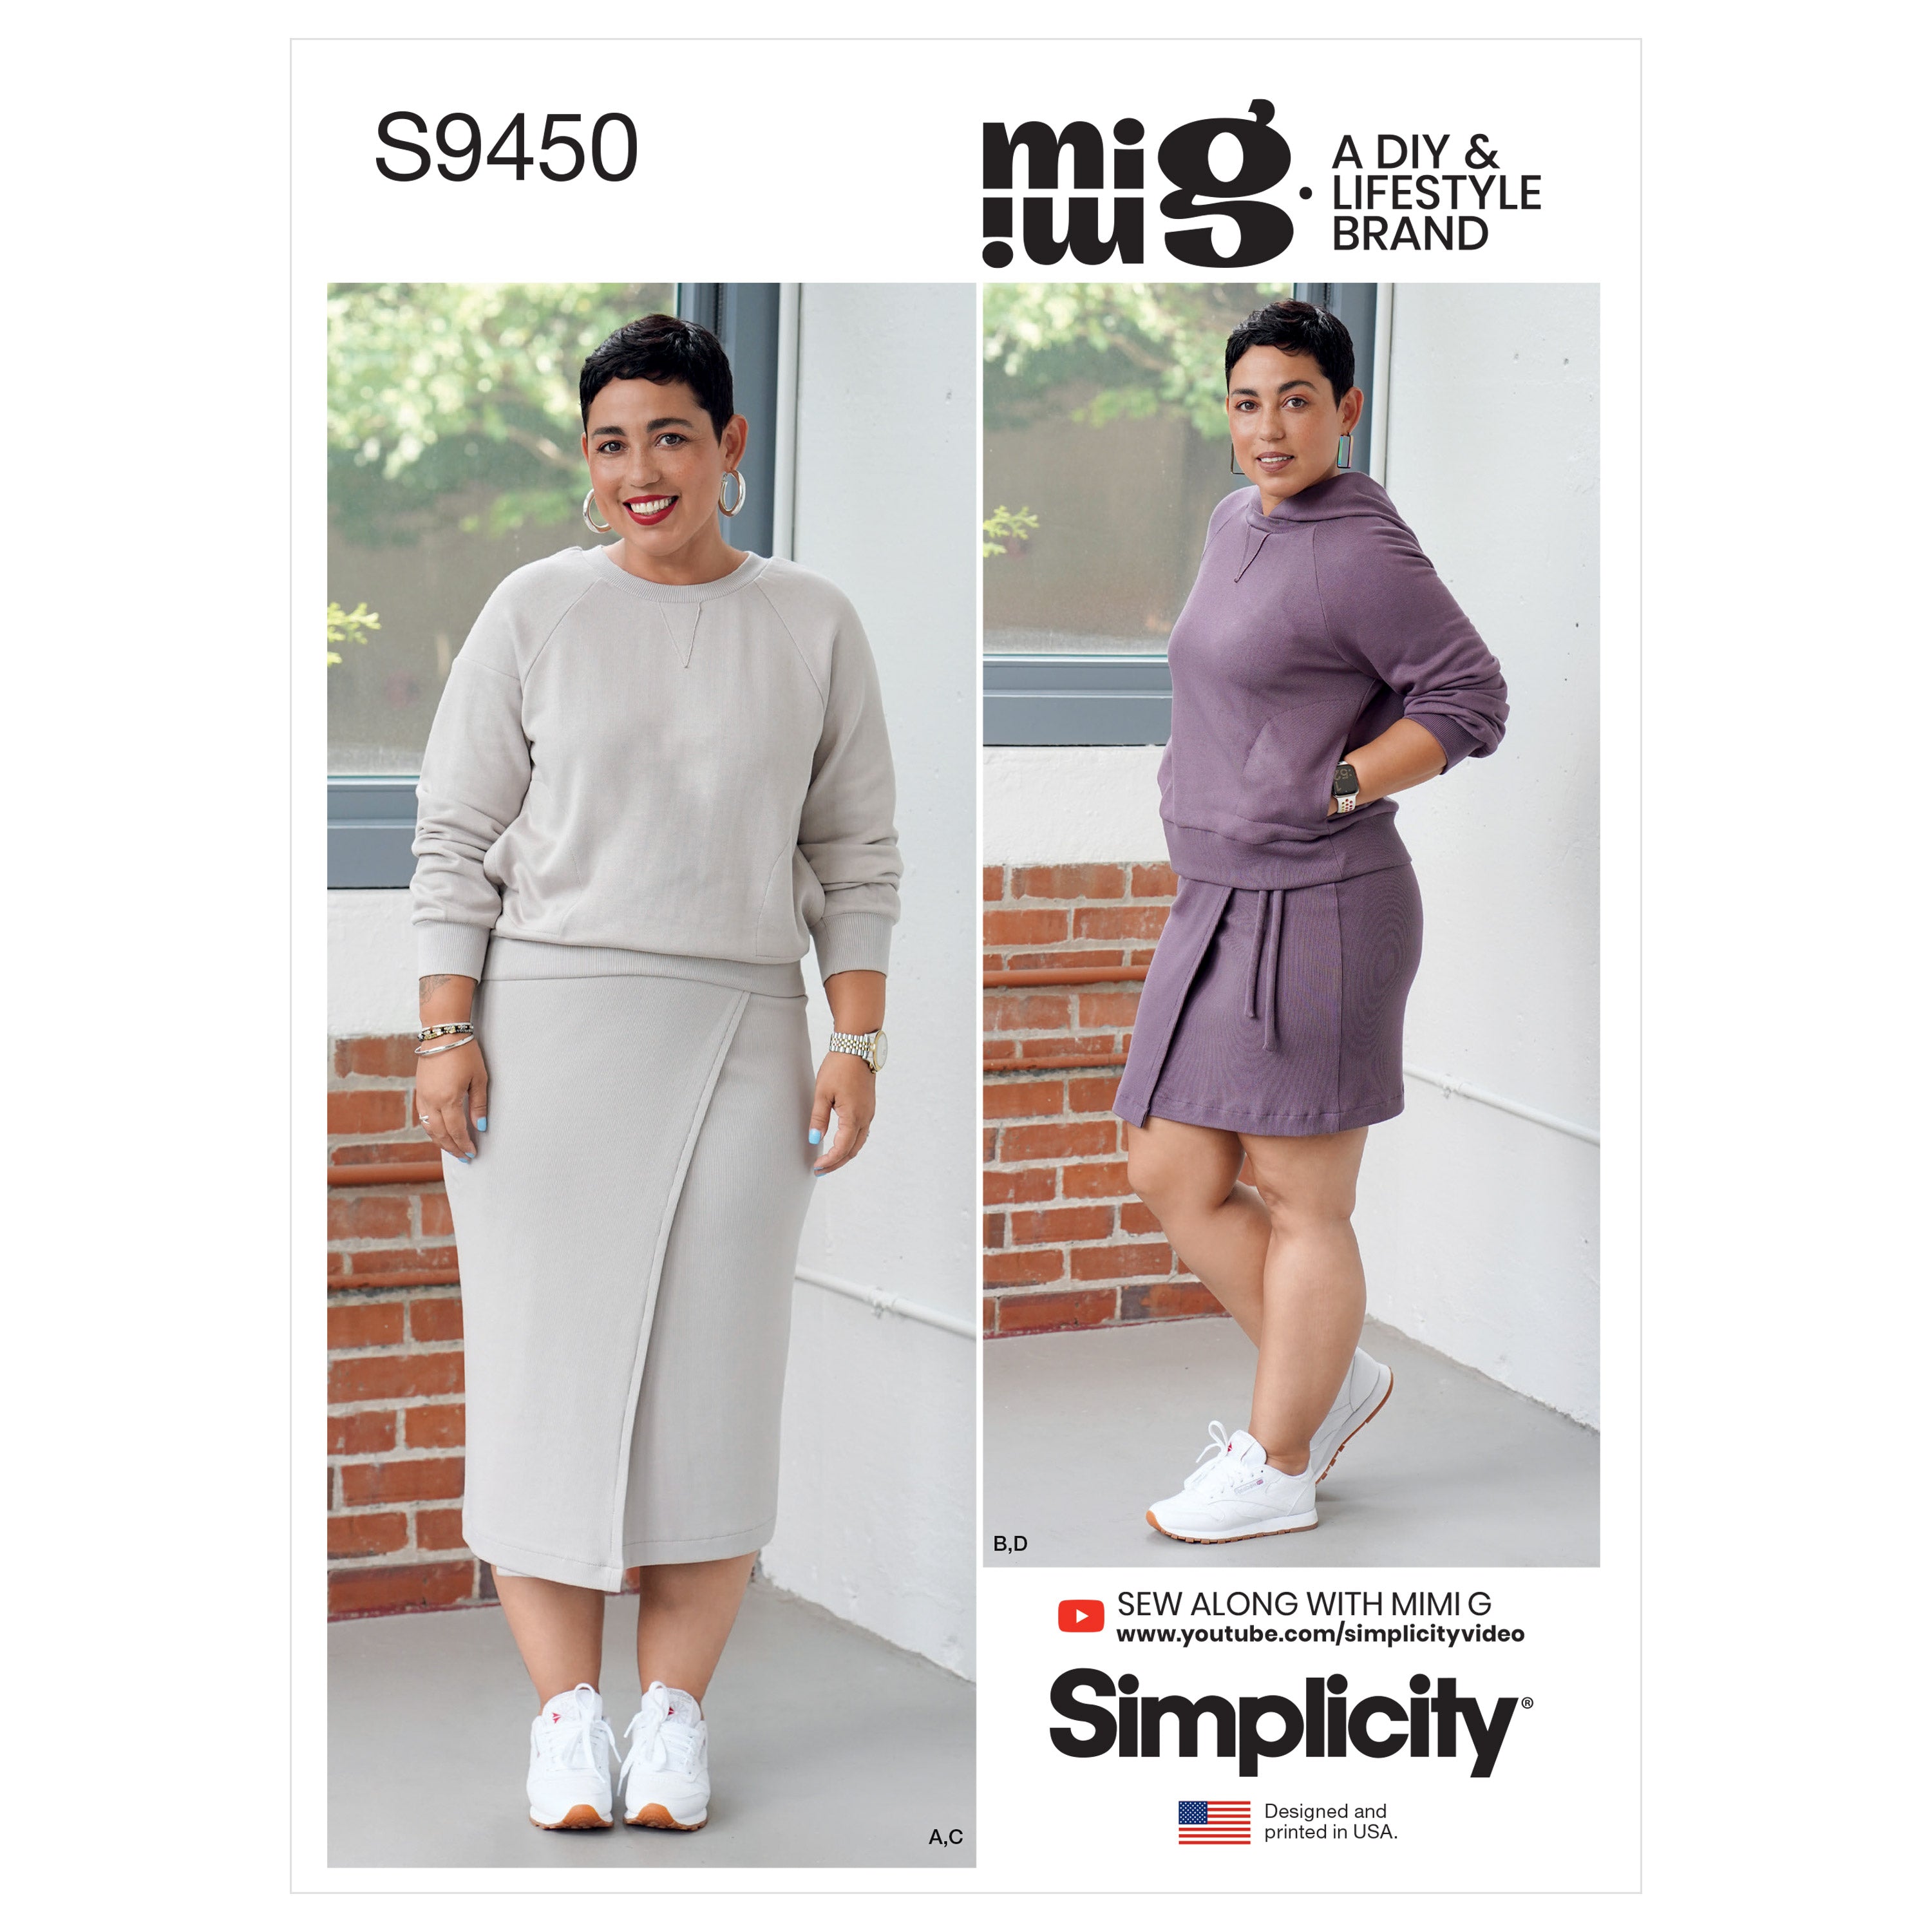 Simplicity Sewing Pattern 9450 Misses' Knit Tops and Skirts from Jaycotts Sewing Supplies